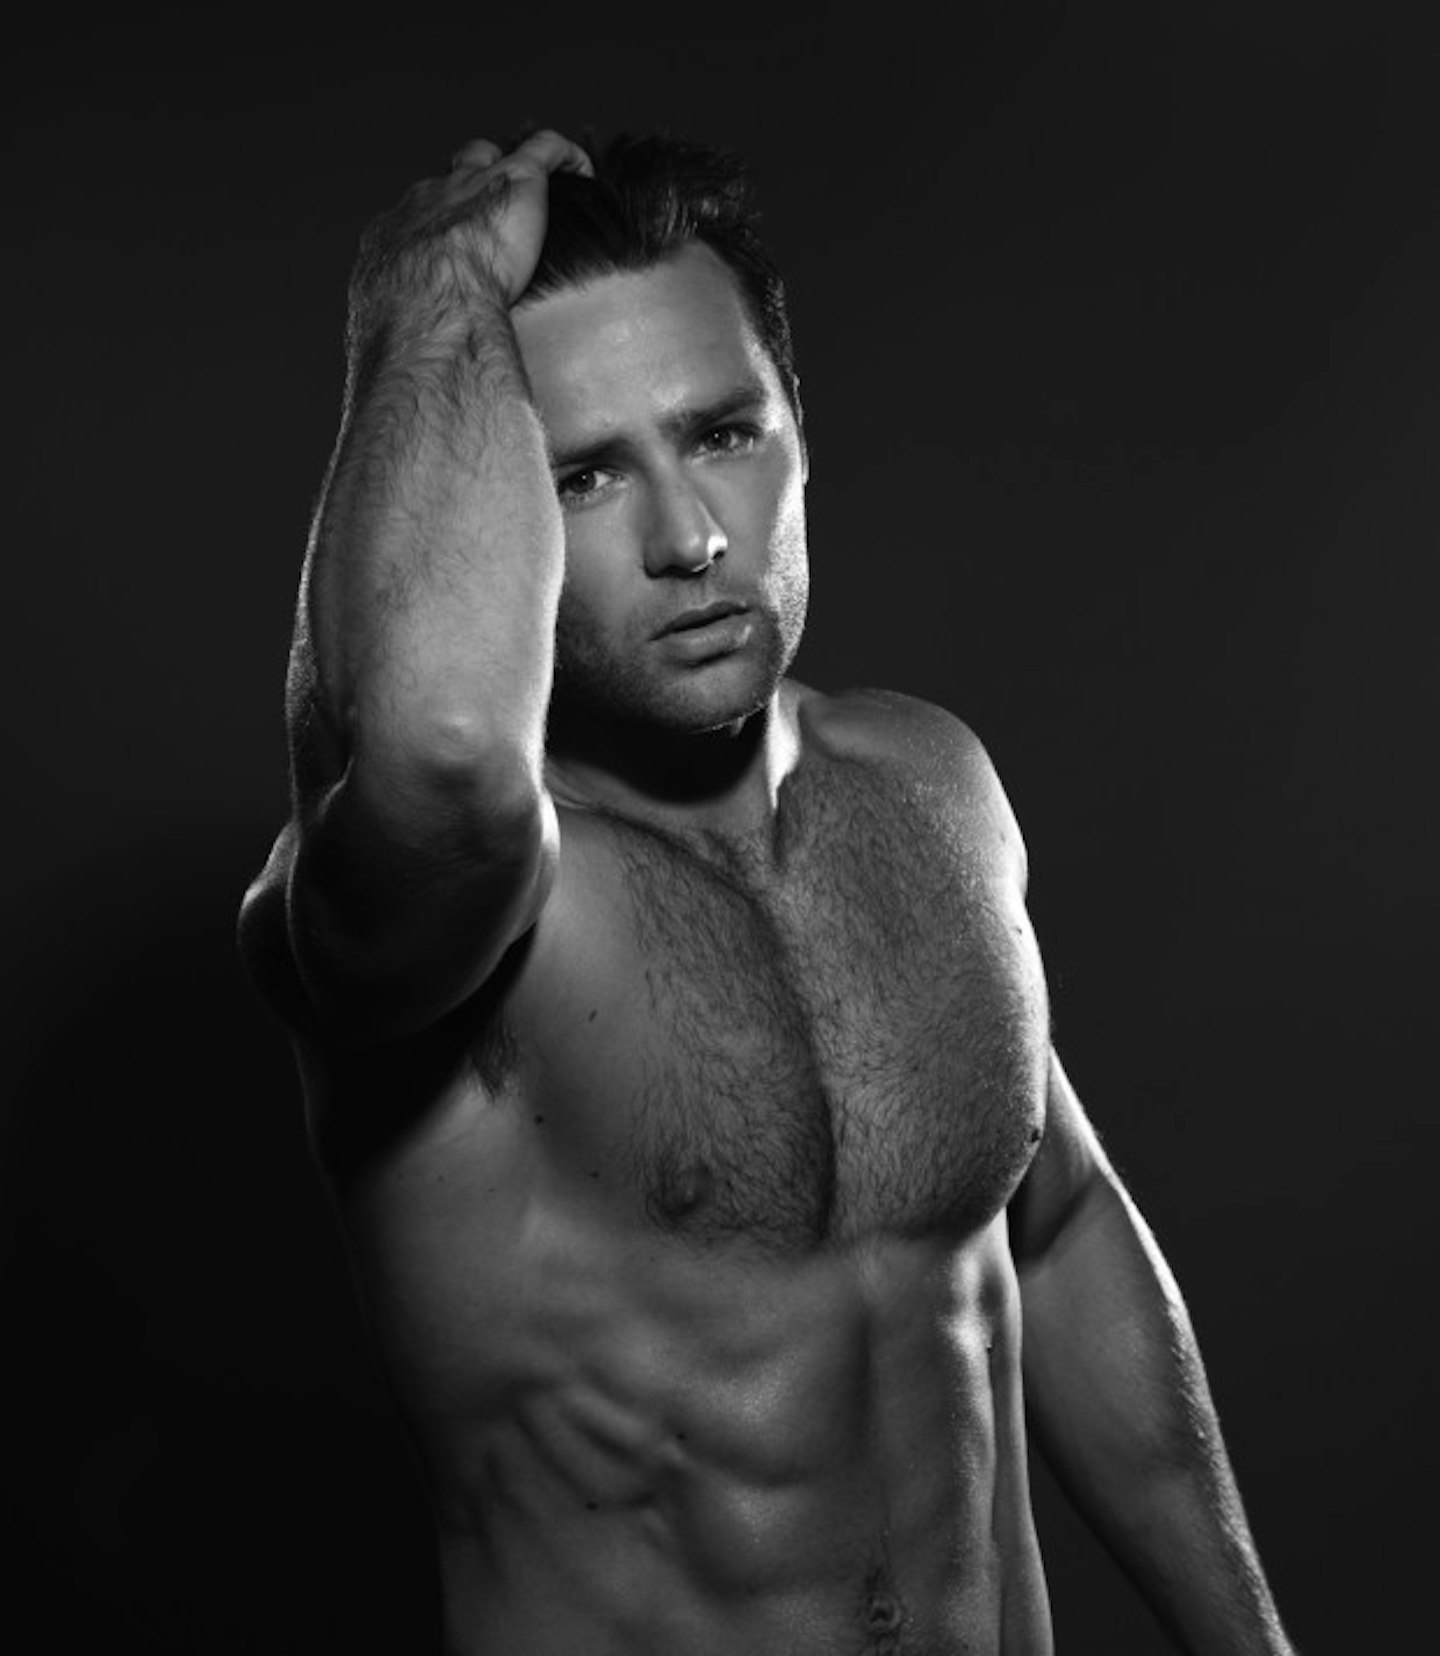 EMBARGOED UNTIL 07.10.15 00.01 Harry Judd teams up with NOW to launch Obleshion, Eau De Walker fragrance ahead of Season 6 of The Walking Dead (5)